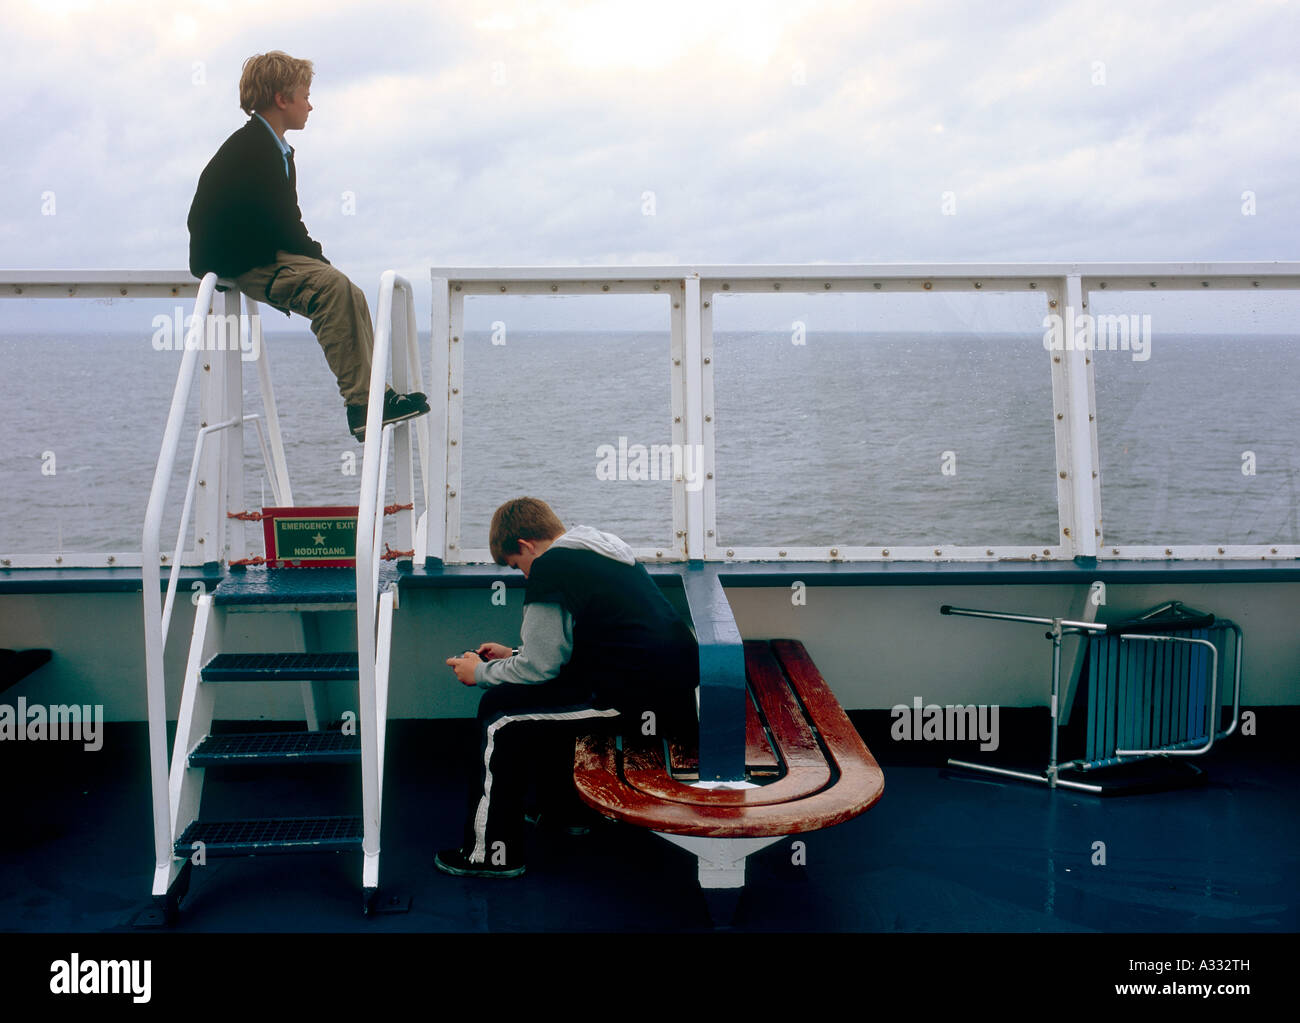 Two young boys on a ferry ship of the Reederei Color Line Stock Photo